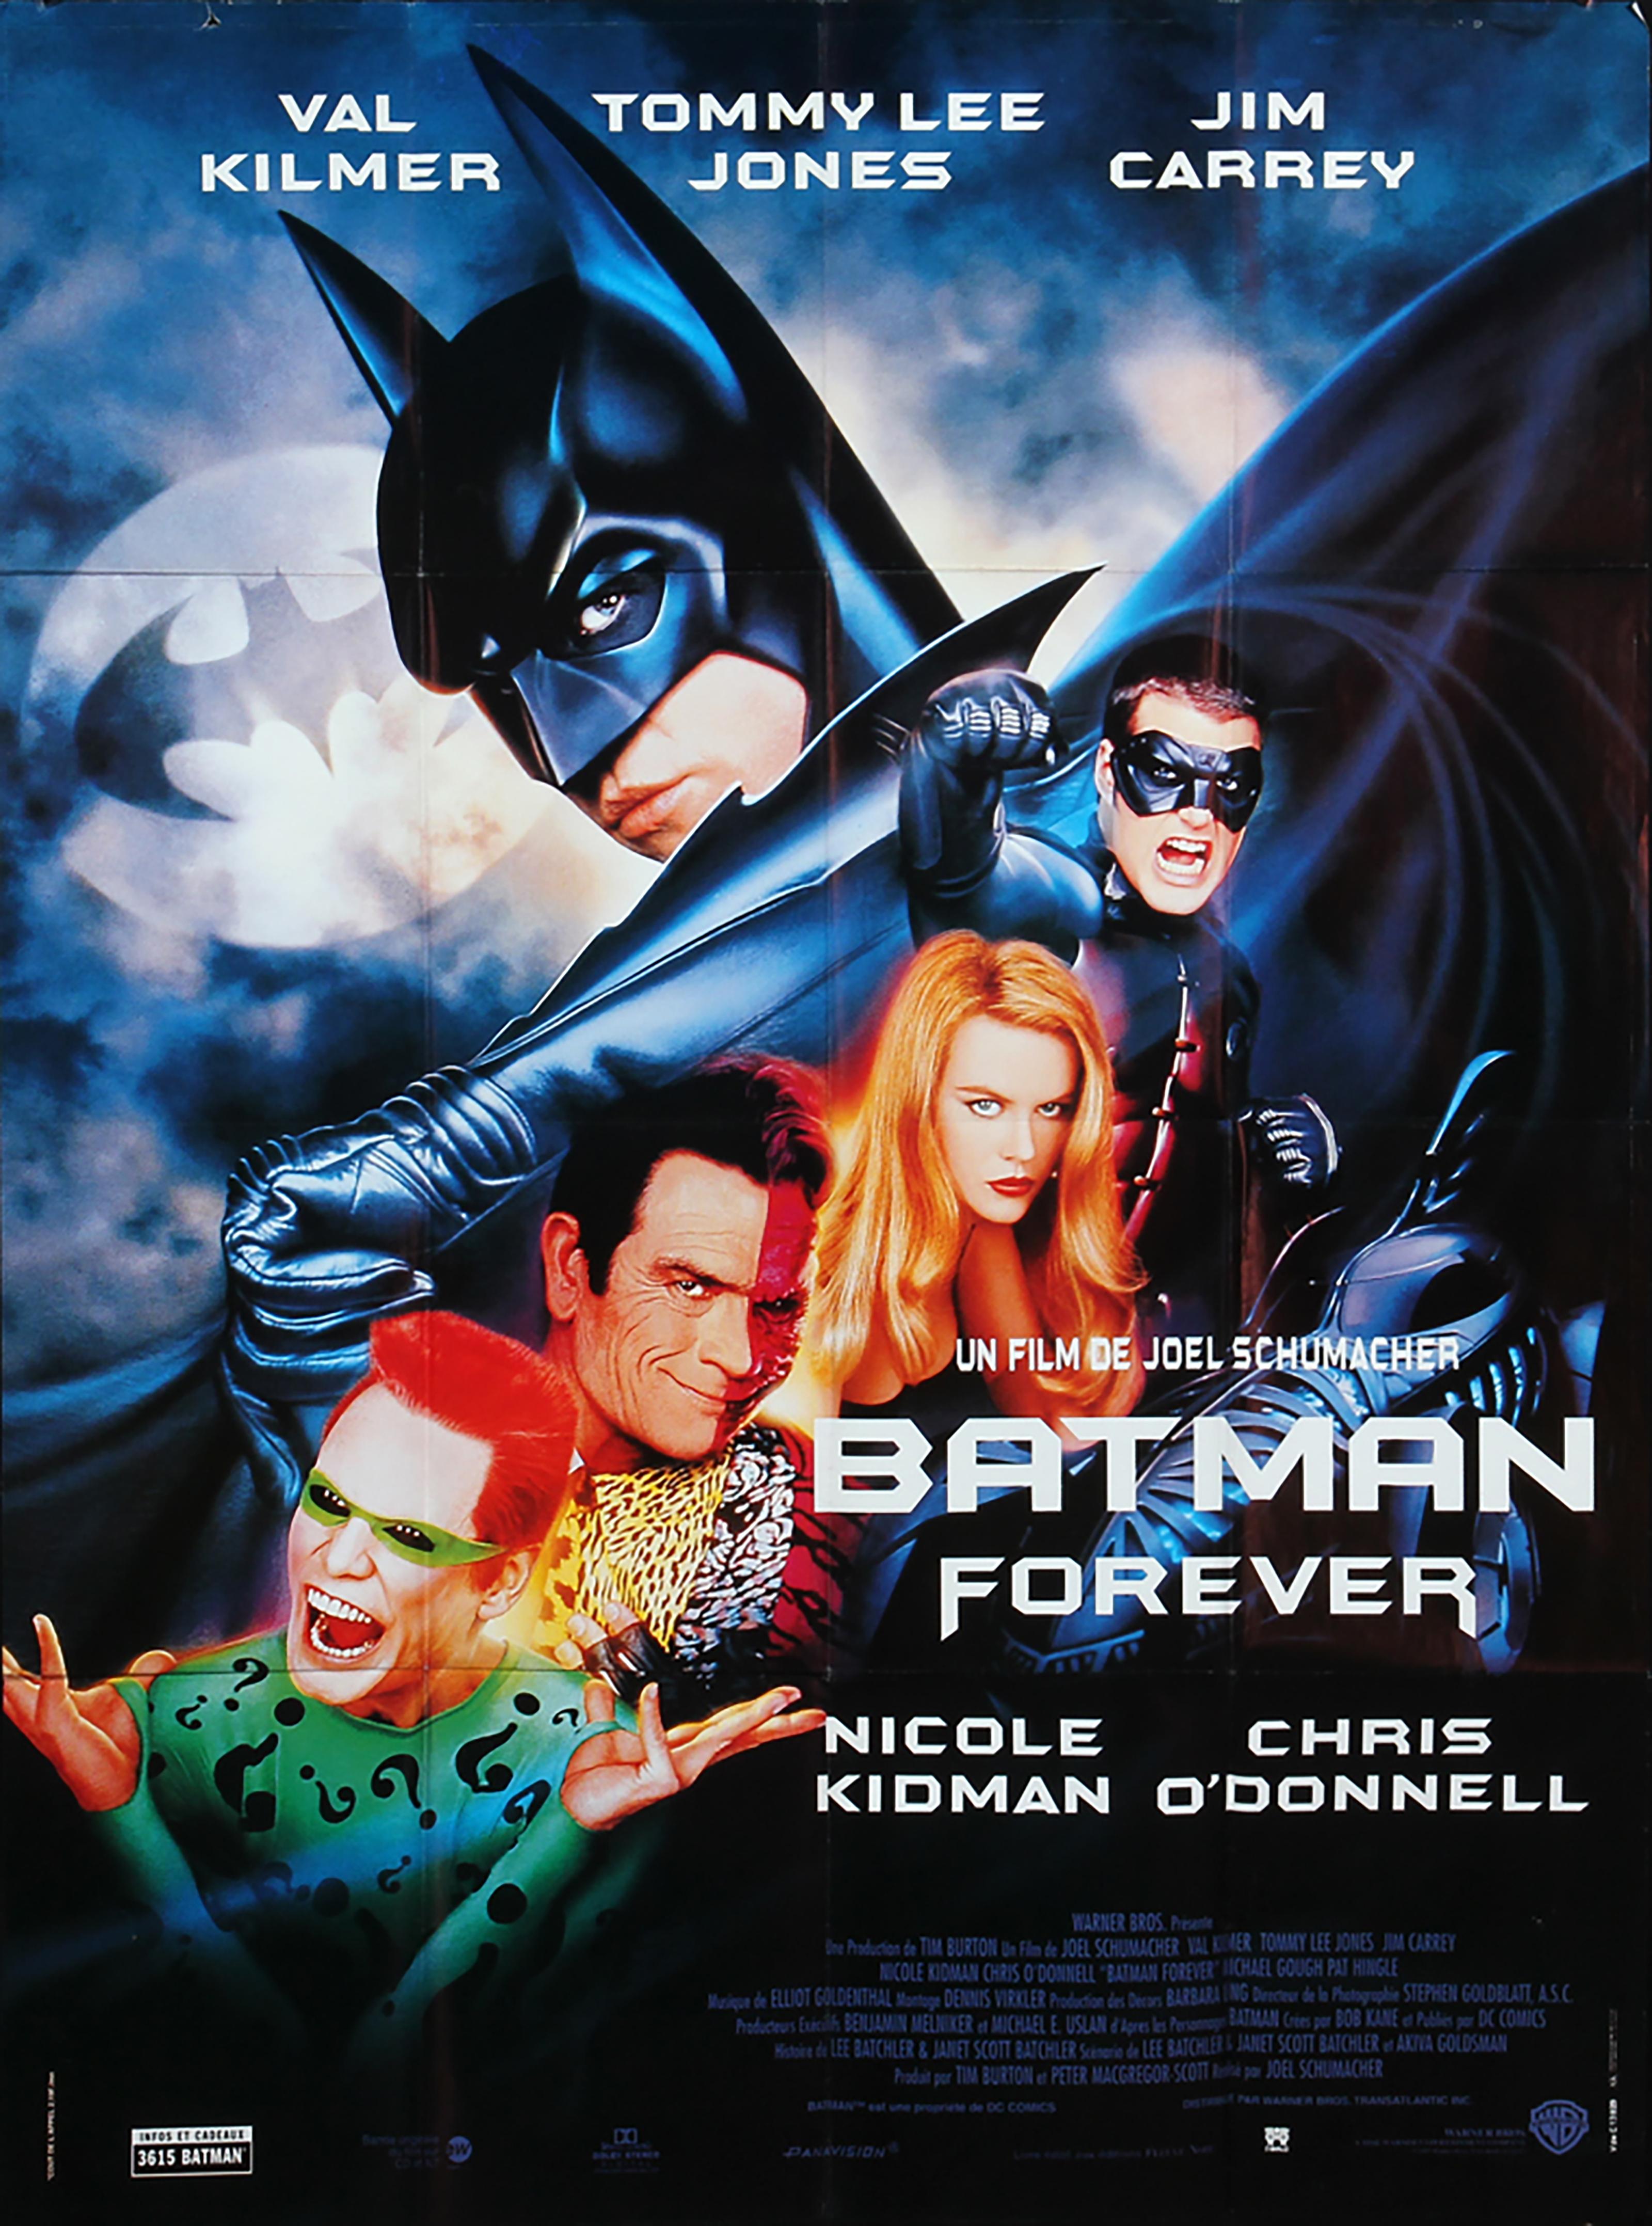 Large, French film poster for the American film 'Batman Forever' with Val Kilmer, offset print, 1995. 156 x 115 cm. Without frame. Folders (these posters have always been sent folded to the cinemas), individual use marks.